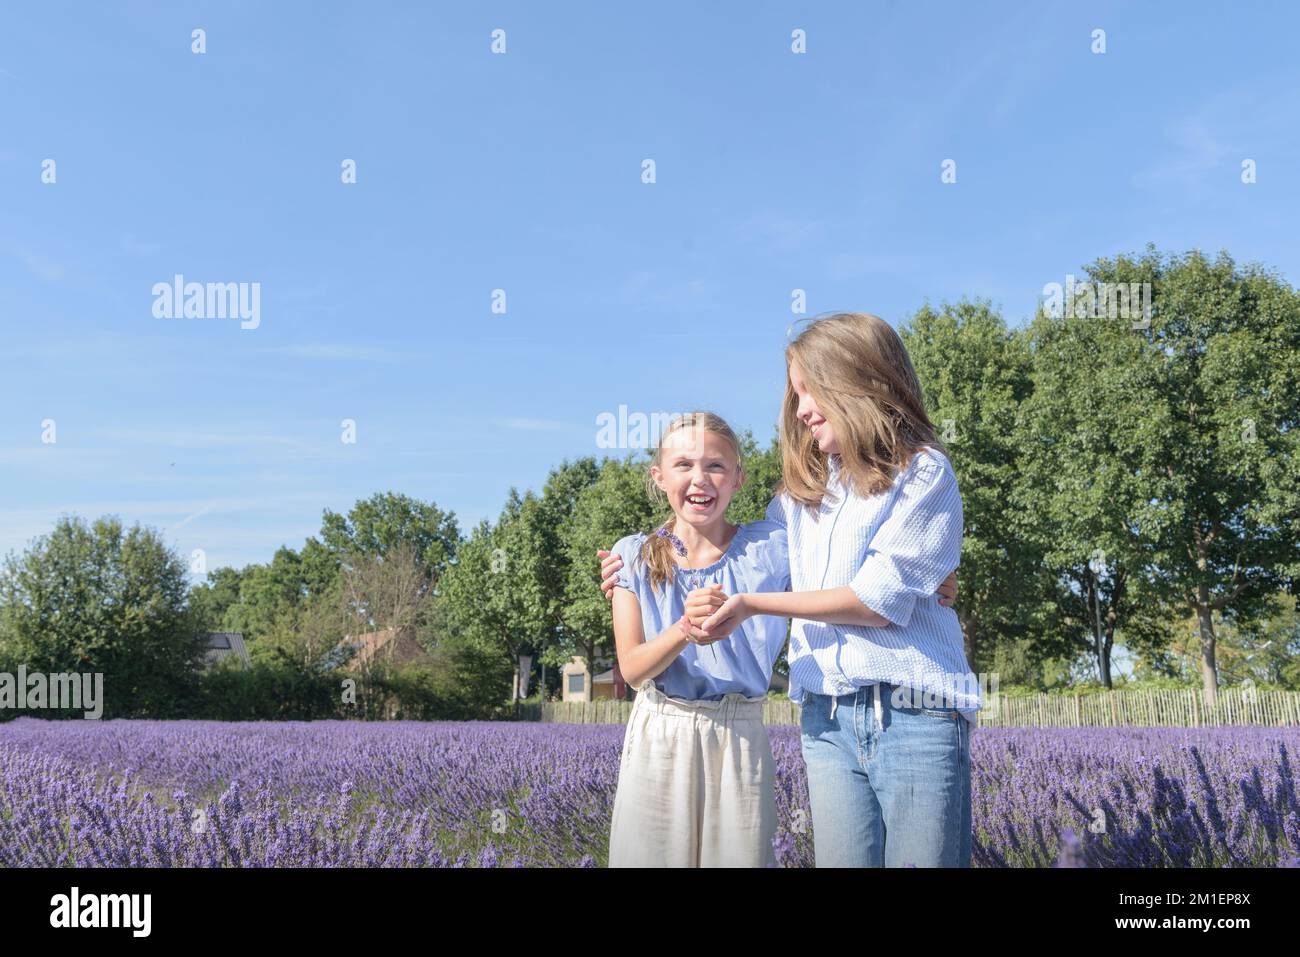 Two teen girls, friends in the middle of a blooming lavender field. The joy of childhood. lifestyle Stock Photo